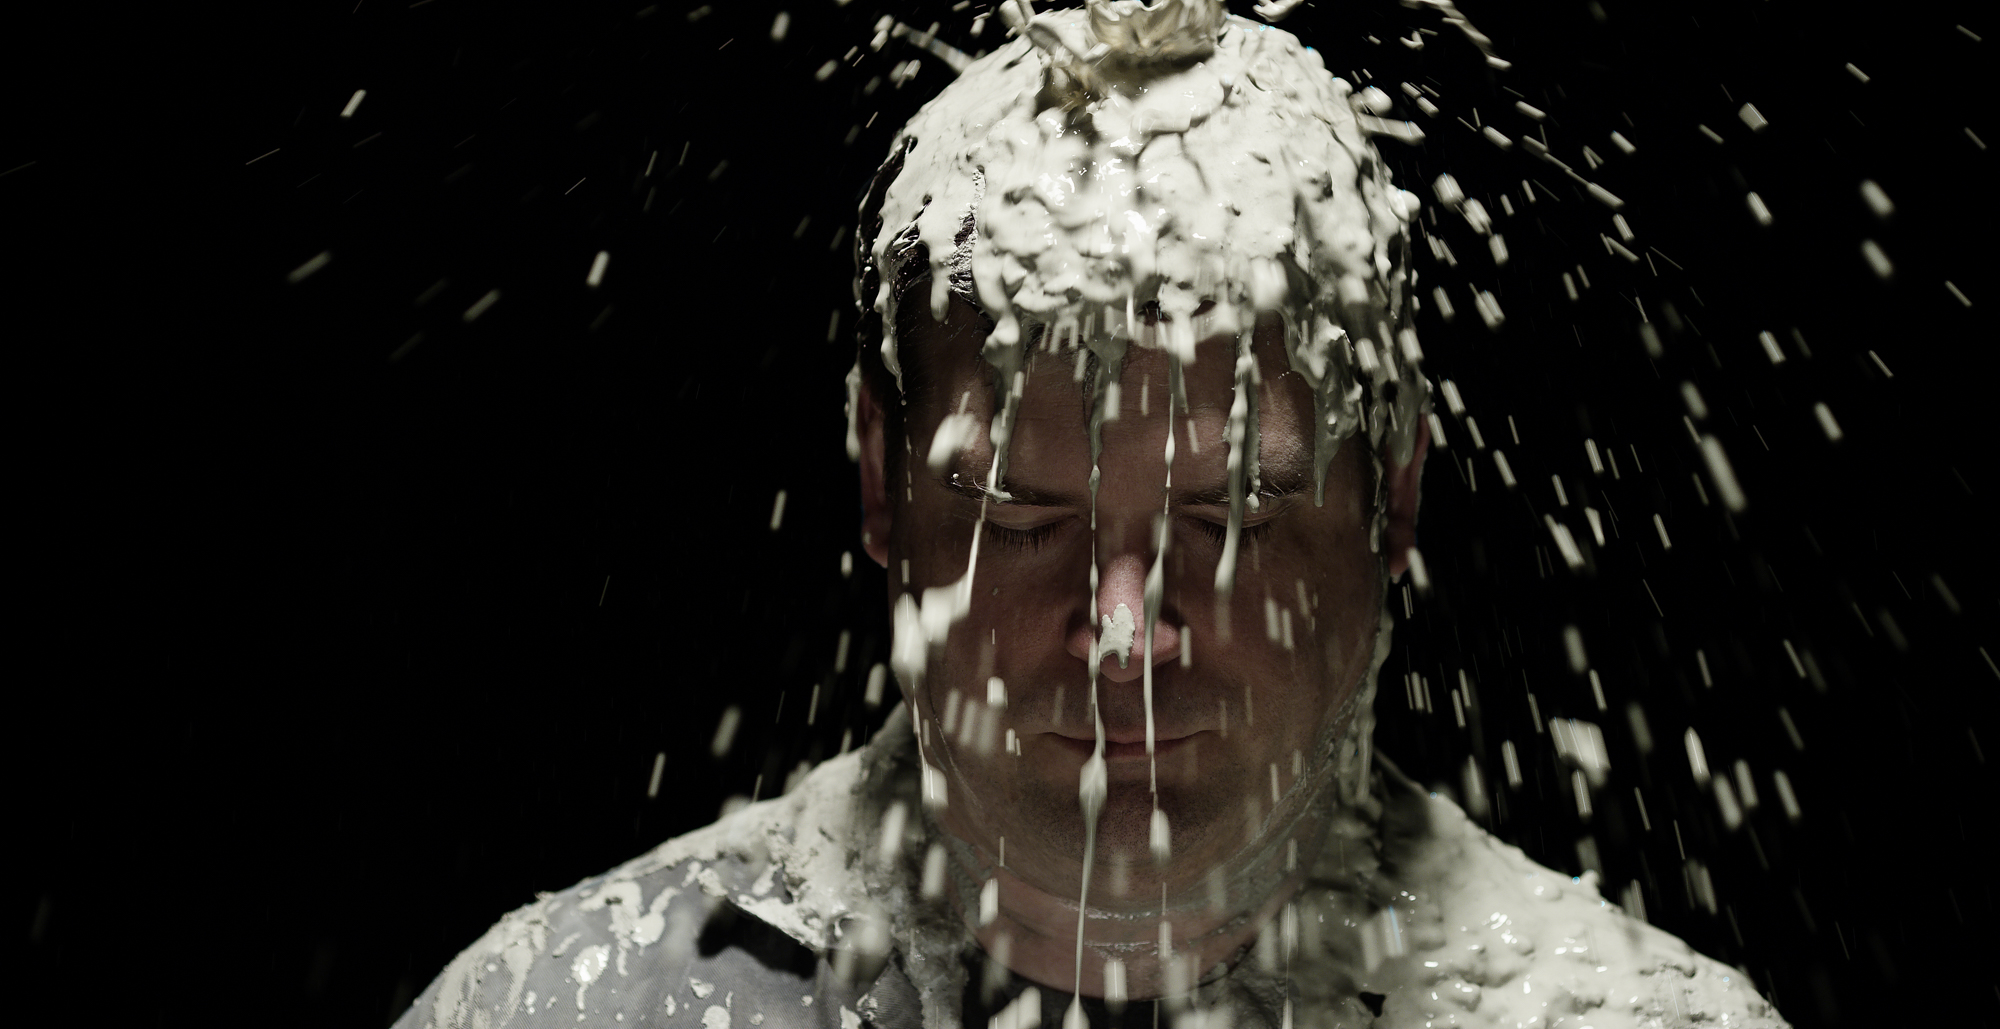 Man has mud pouring over face in spotlit dark room.